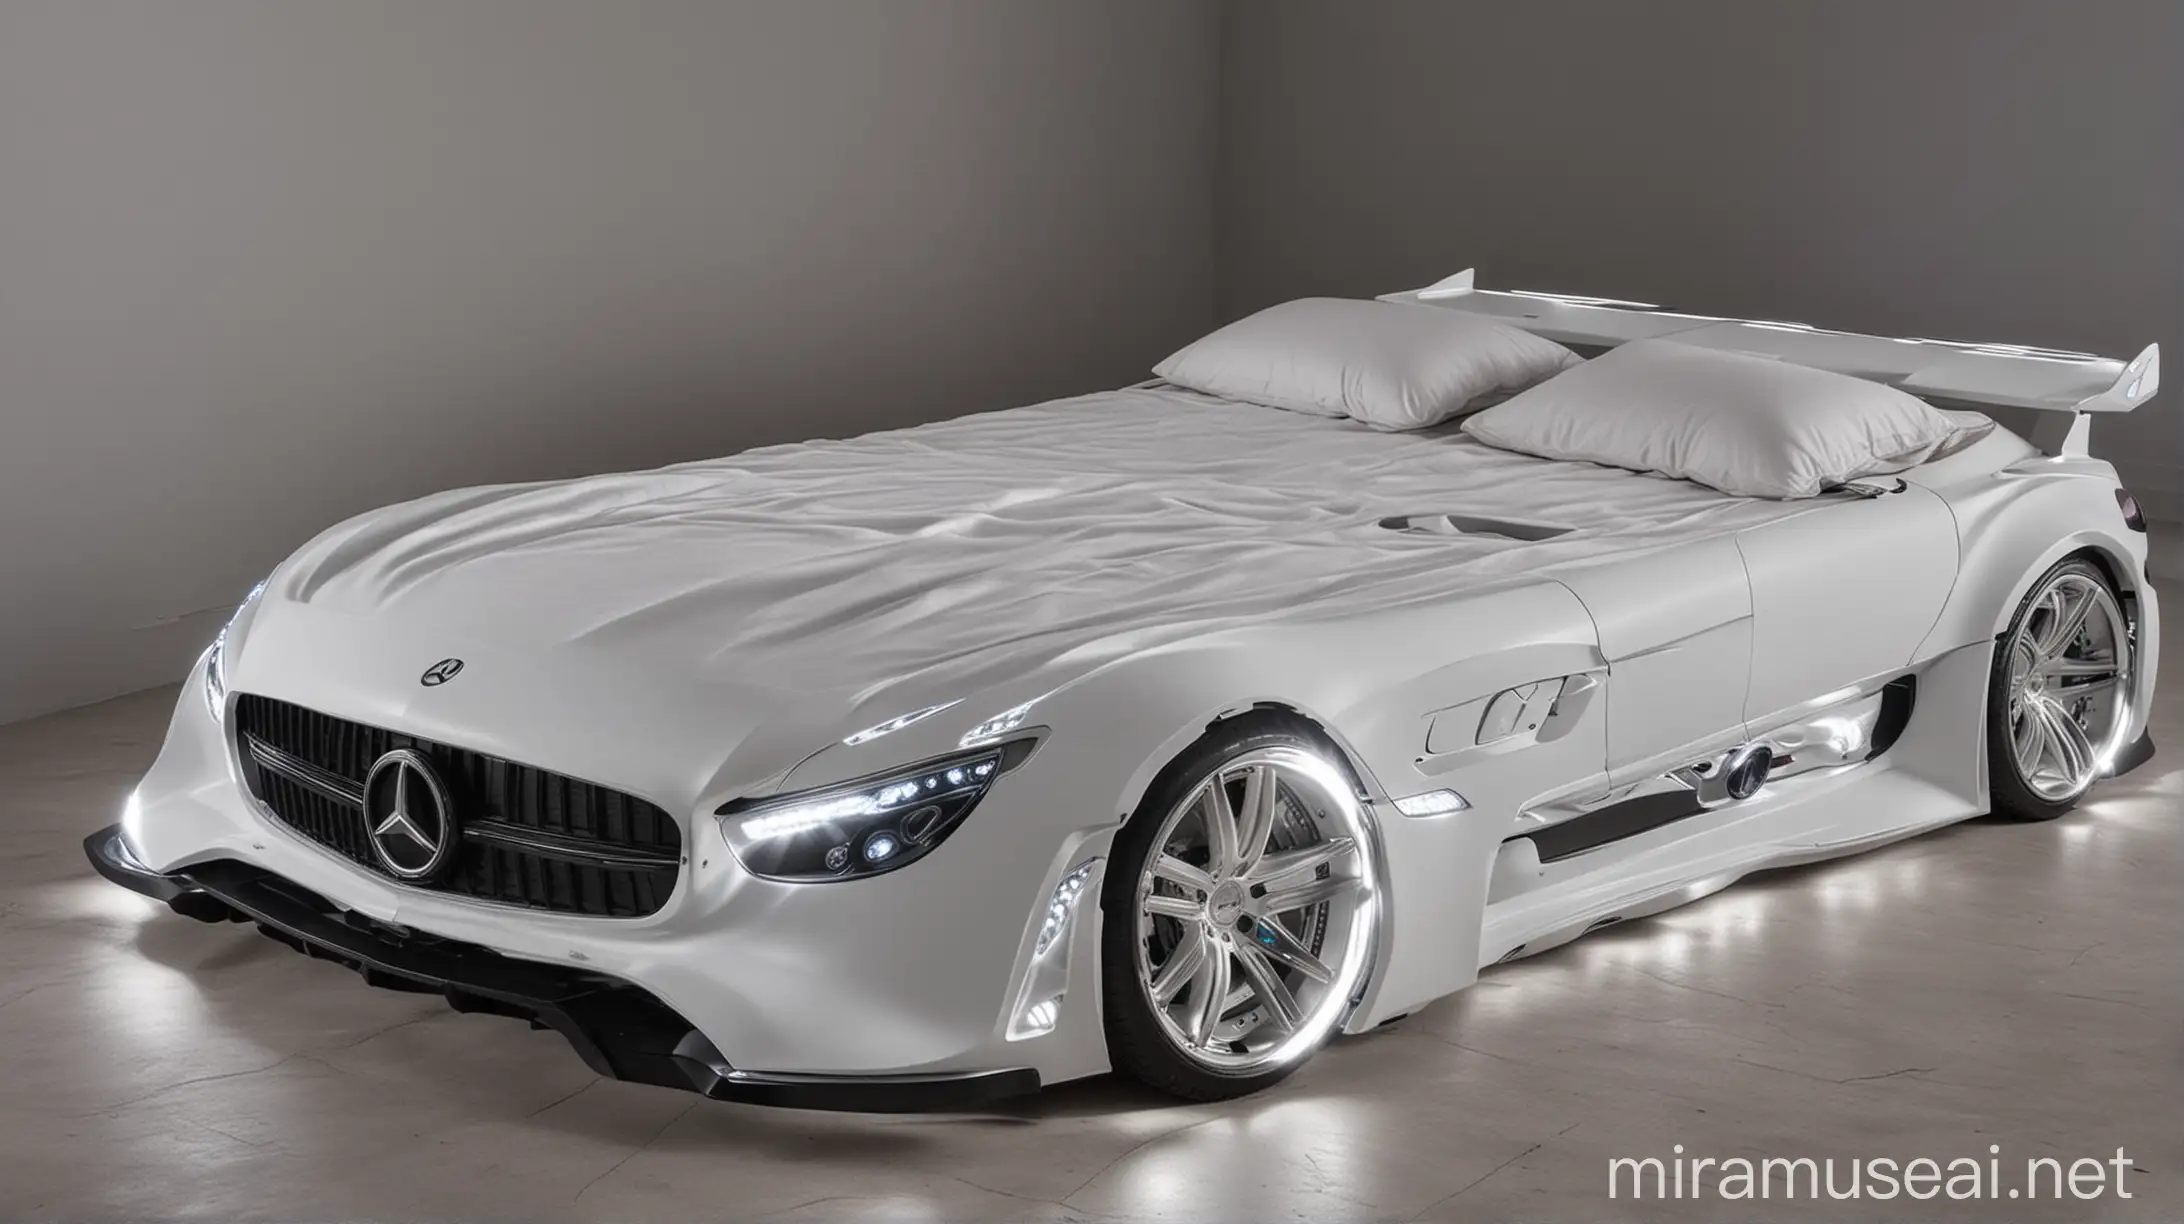 Luxurious Mercedes AMG CarShaped Double Bed with Illuminated Headlights